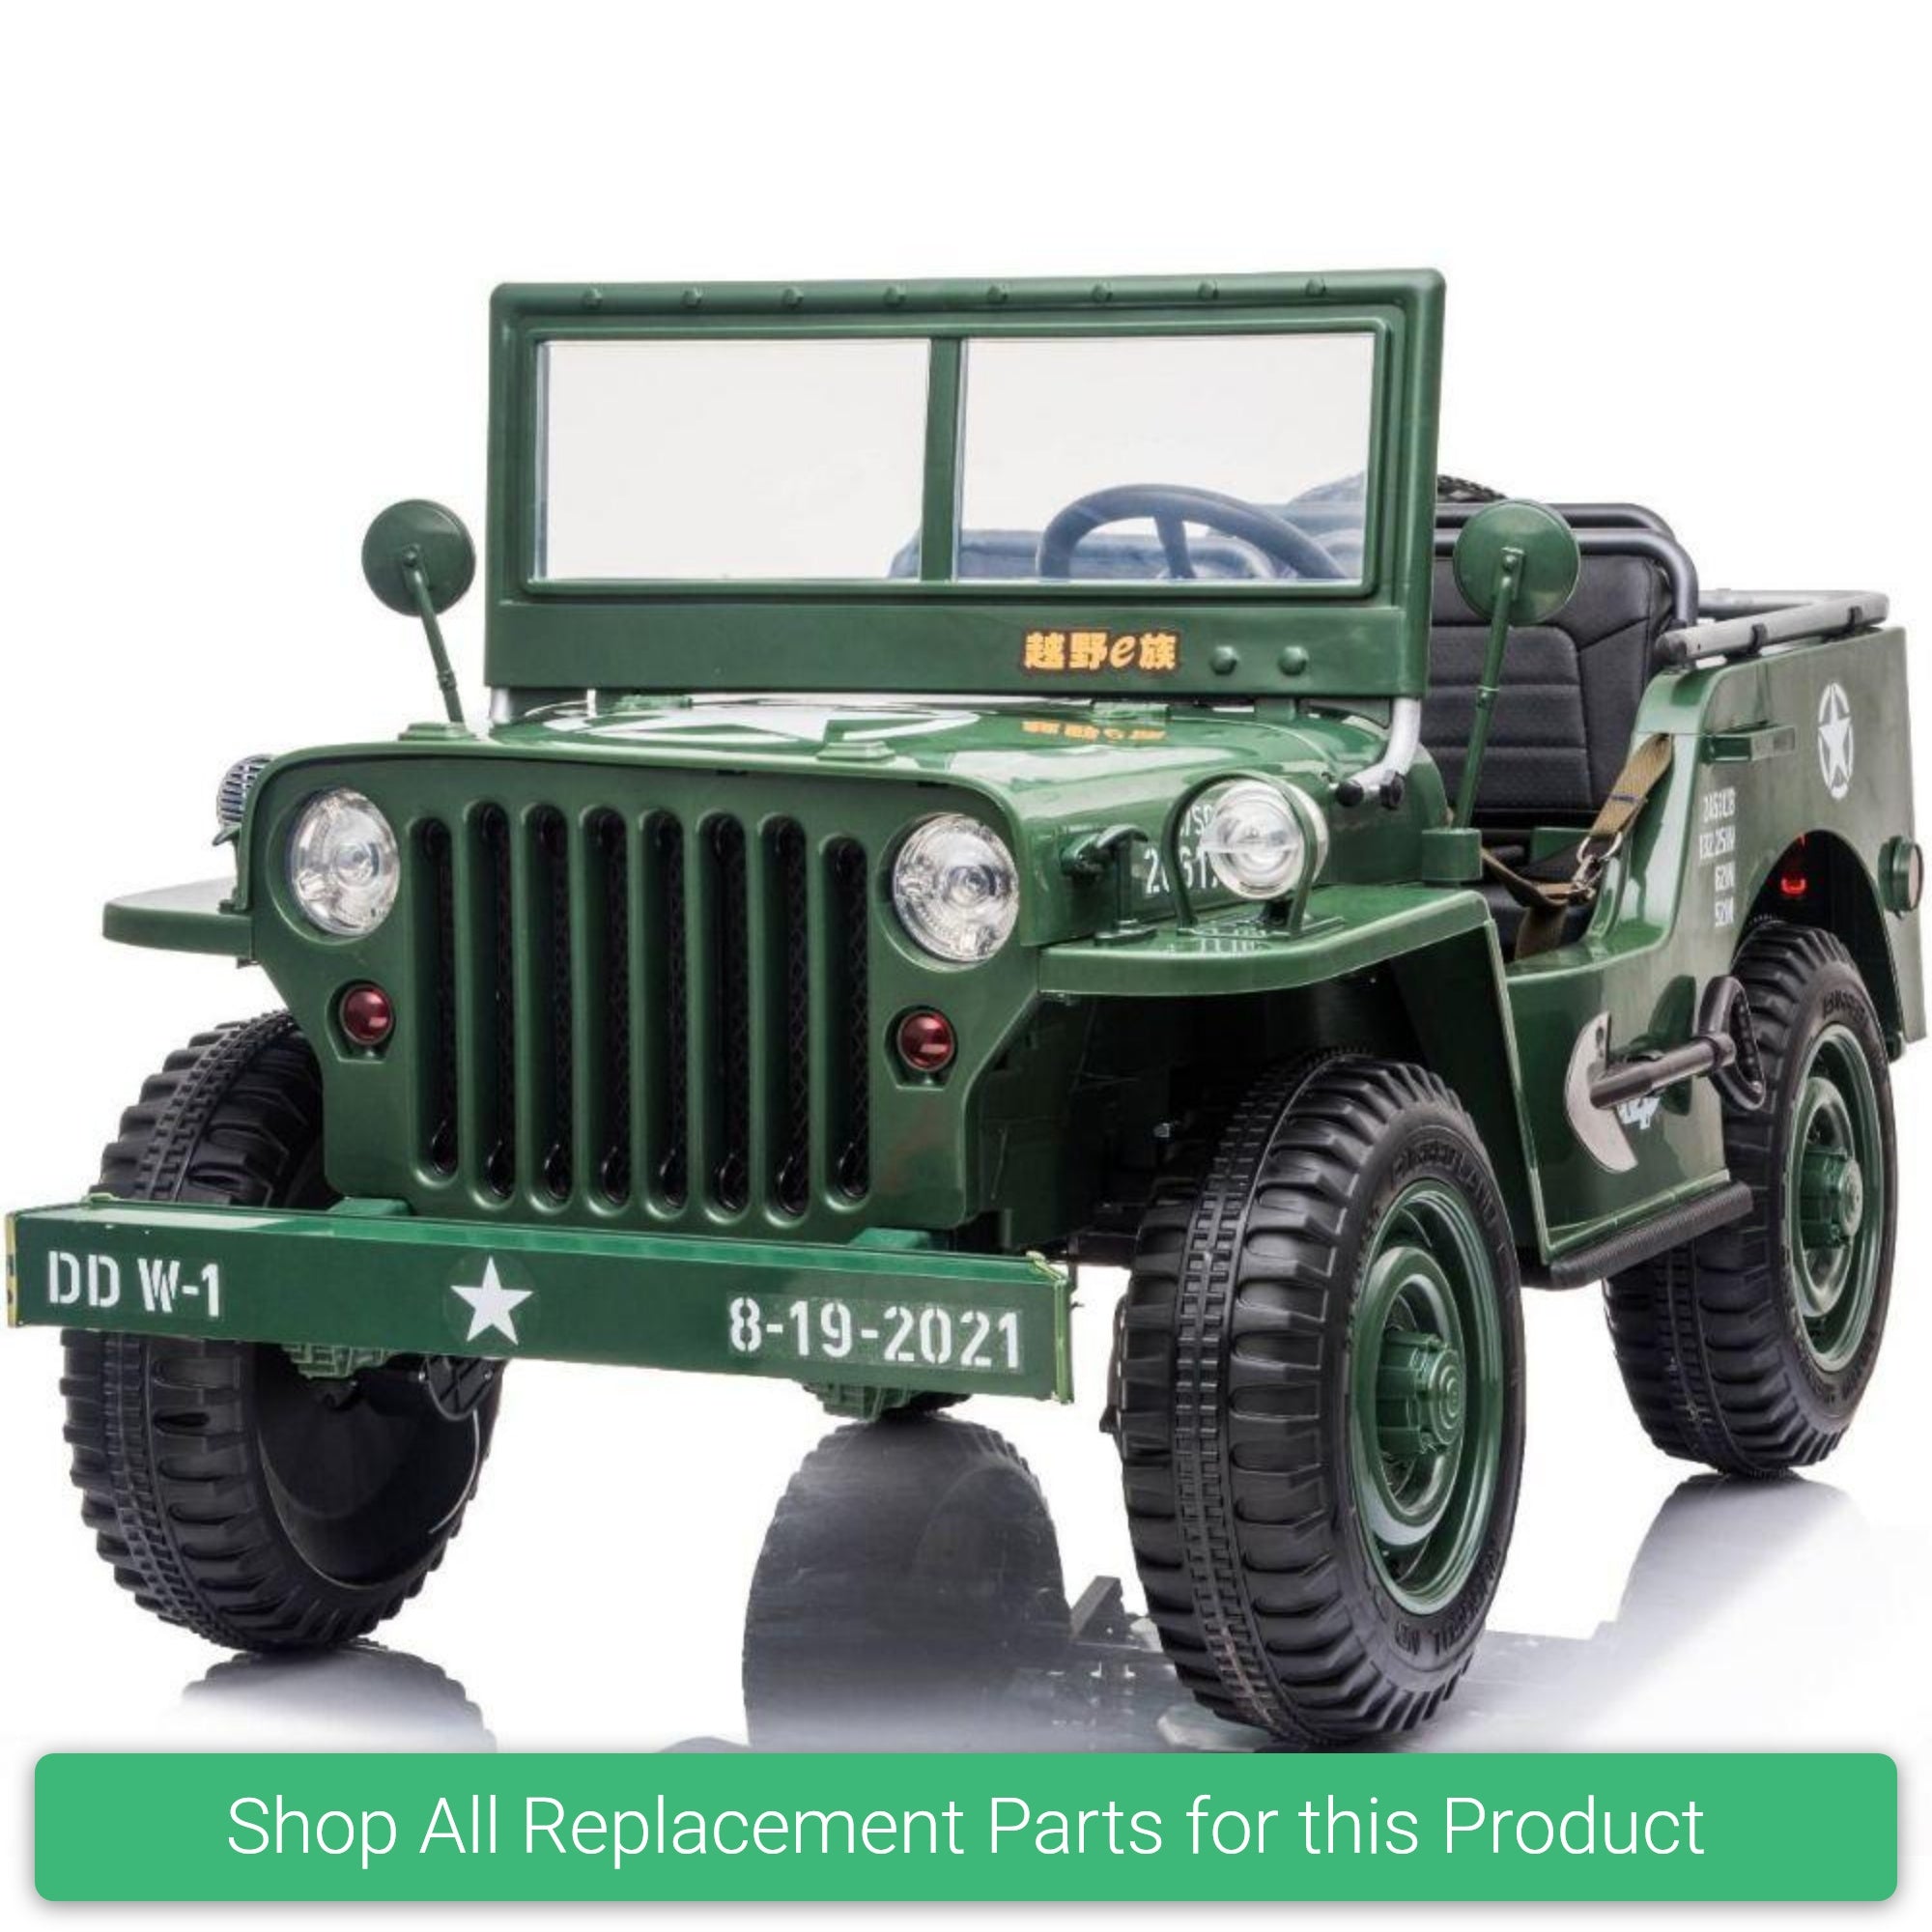 Replacement Parts and Spares for Kids Hotchkiss Willys Jeep Style - HOTC-JEEP-VARI - JH-101